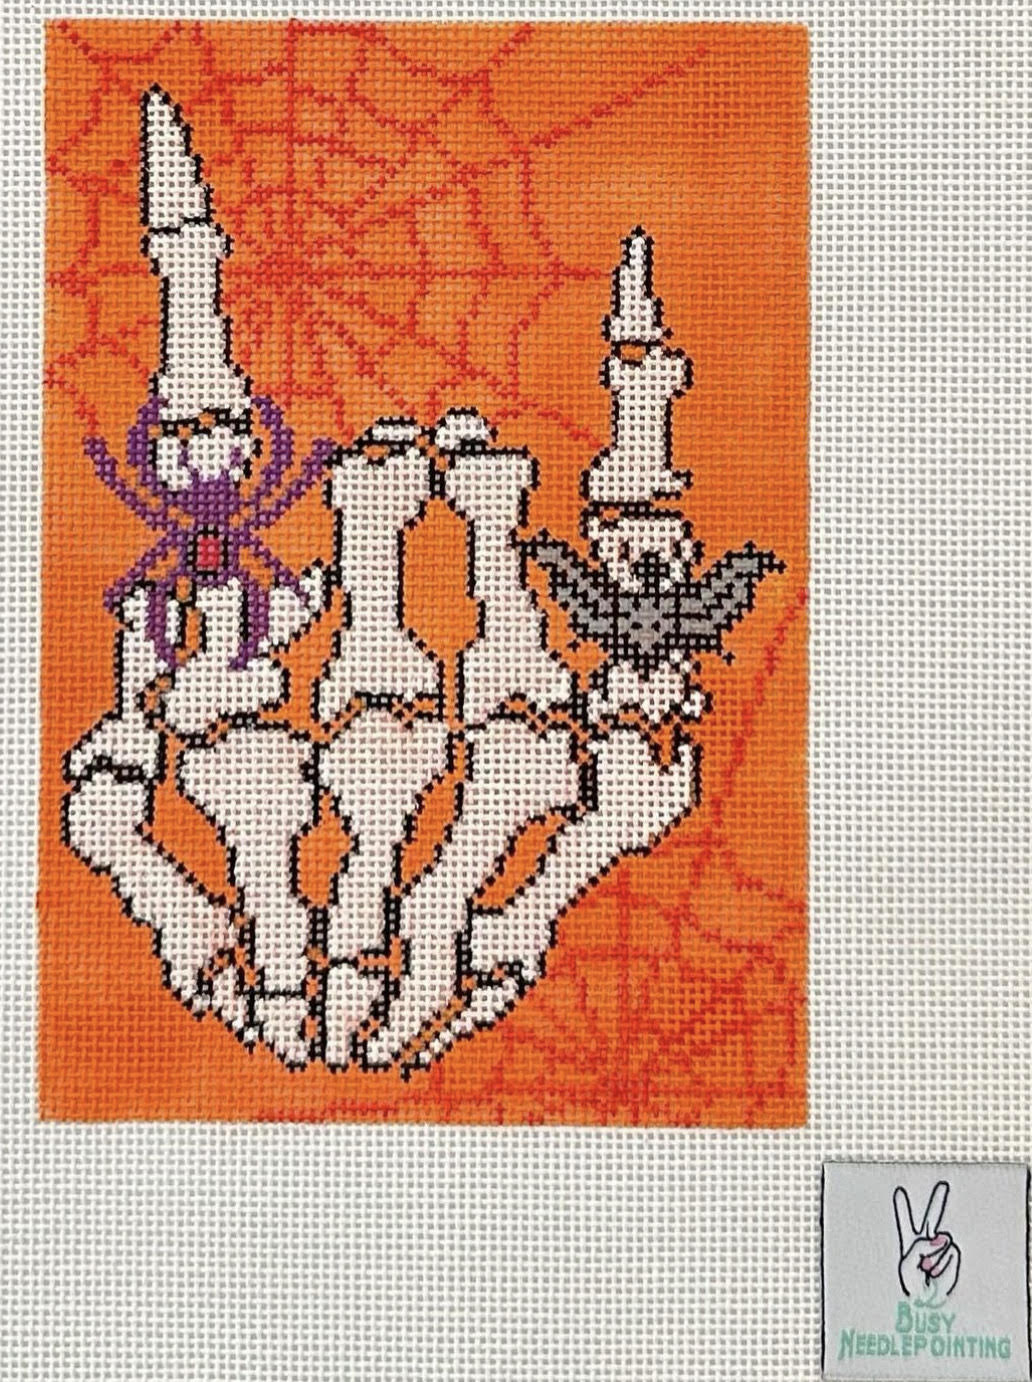 2 Busy Needlepointing Spooky Rocking